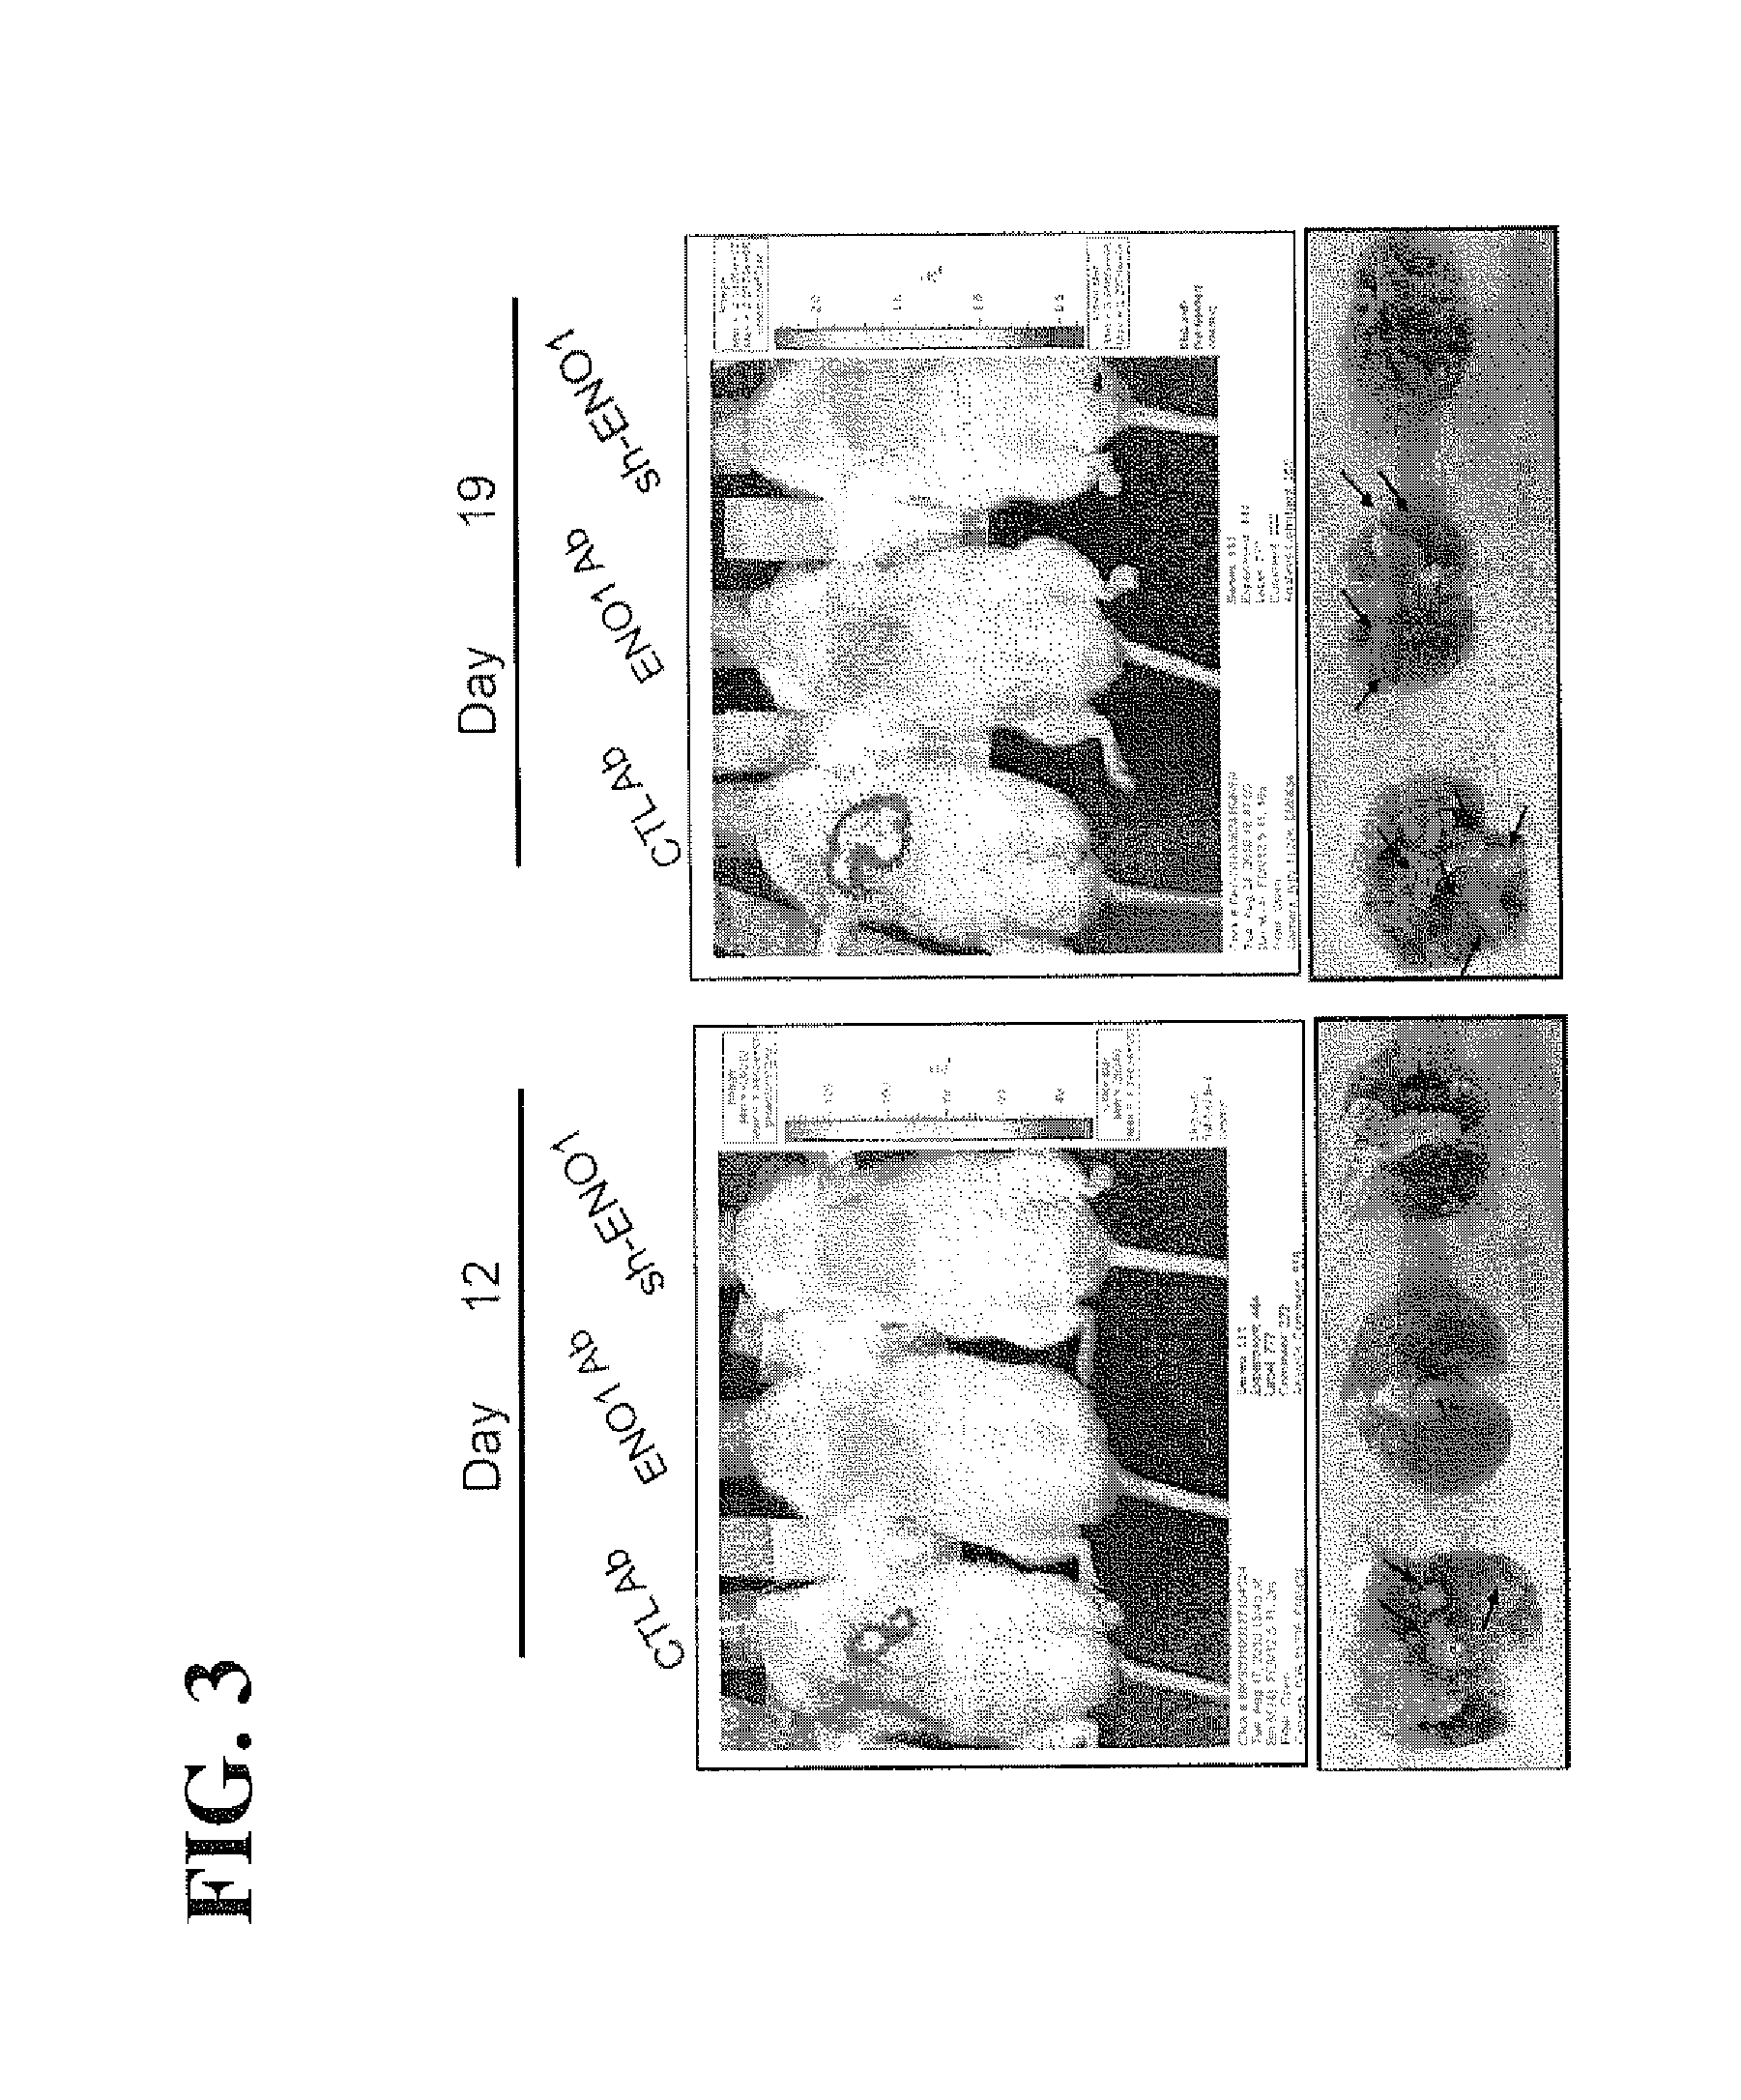 Alpha-enolase specific antibodies and methods of uses in cancer therapy